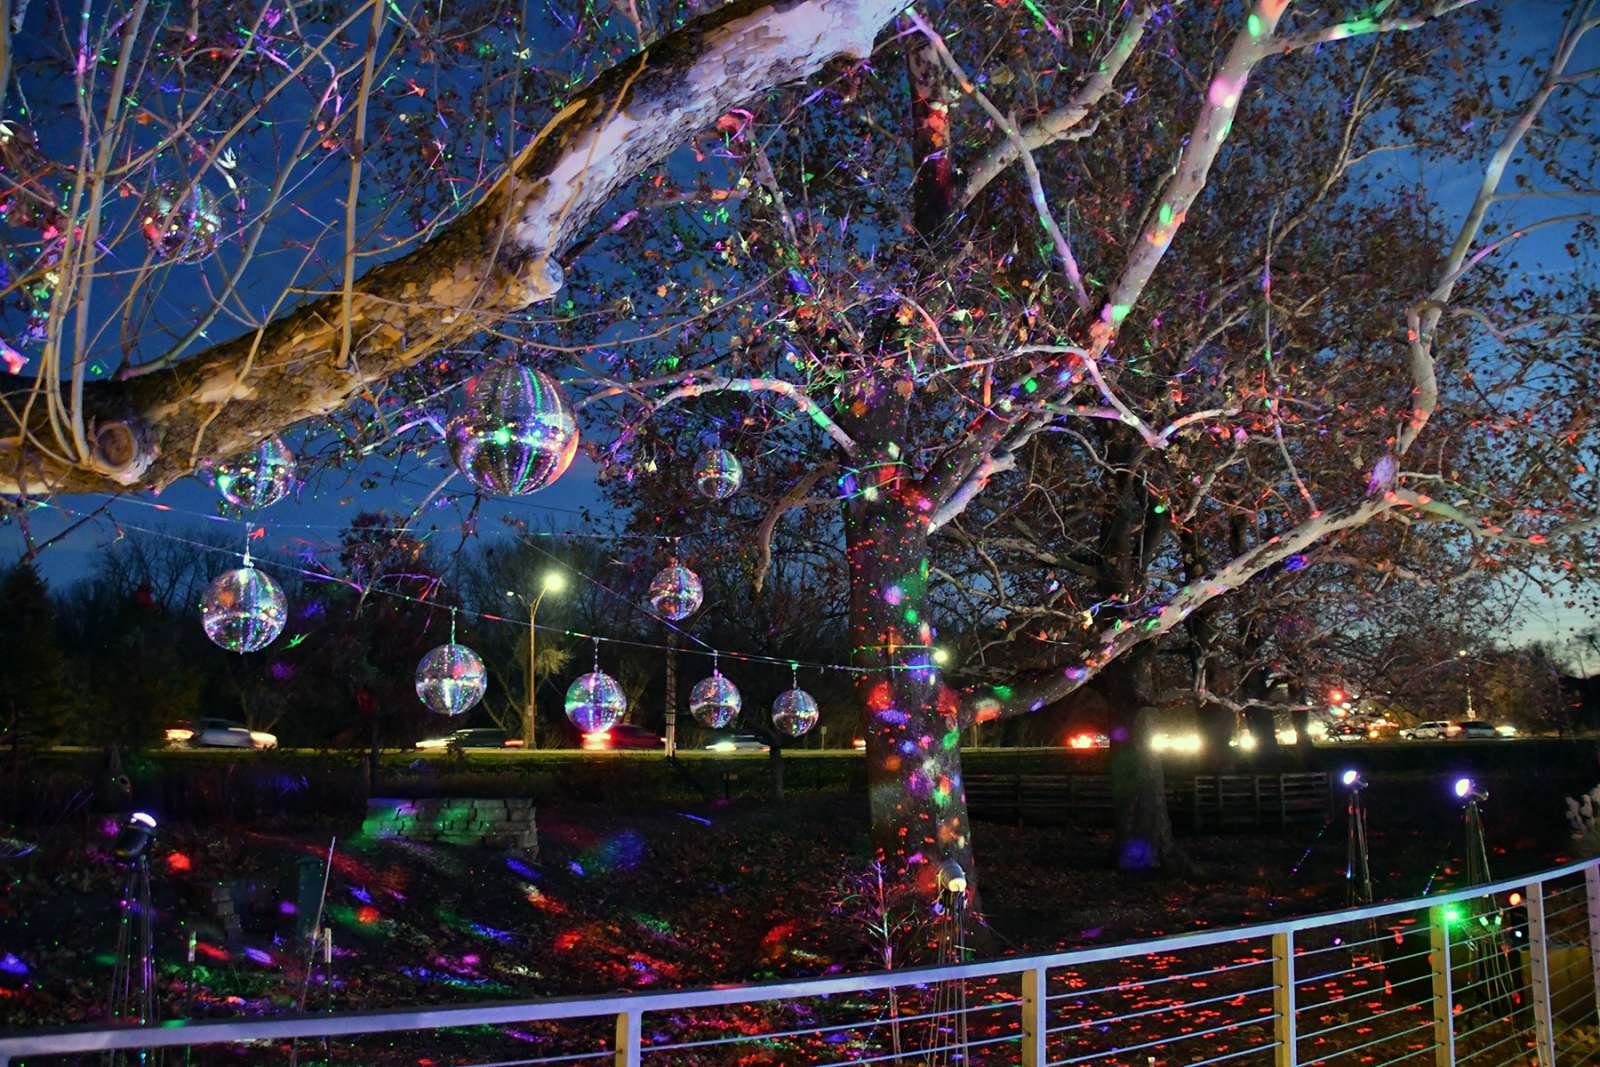 Sparkling disco balls hang and reflect lights which sparkle against all of the trees, landscape, and bridge.